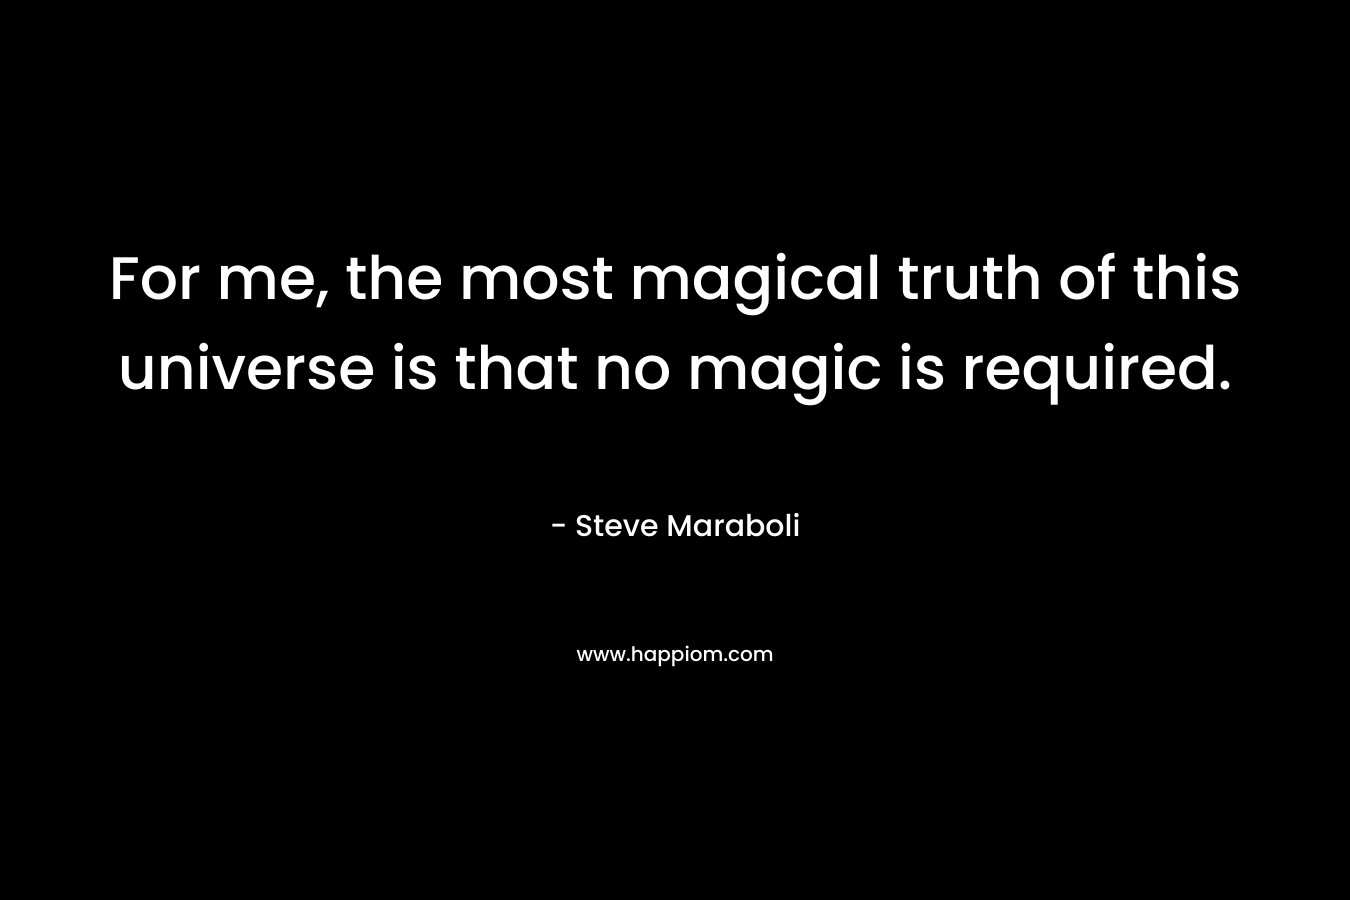 For me, the most magical truth of this universe is that no magic is required.